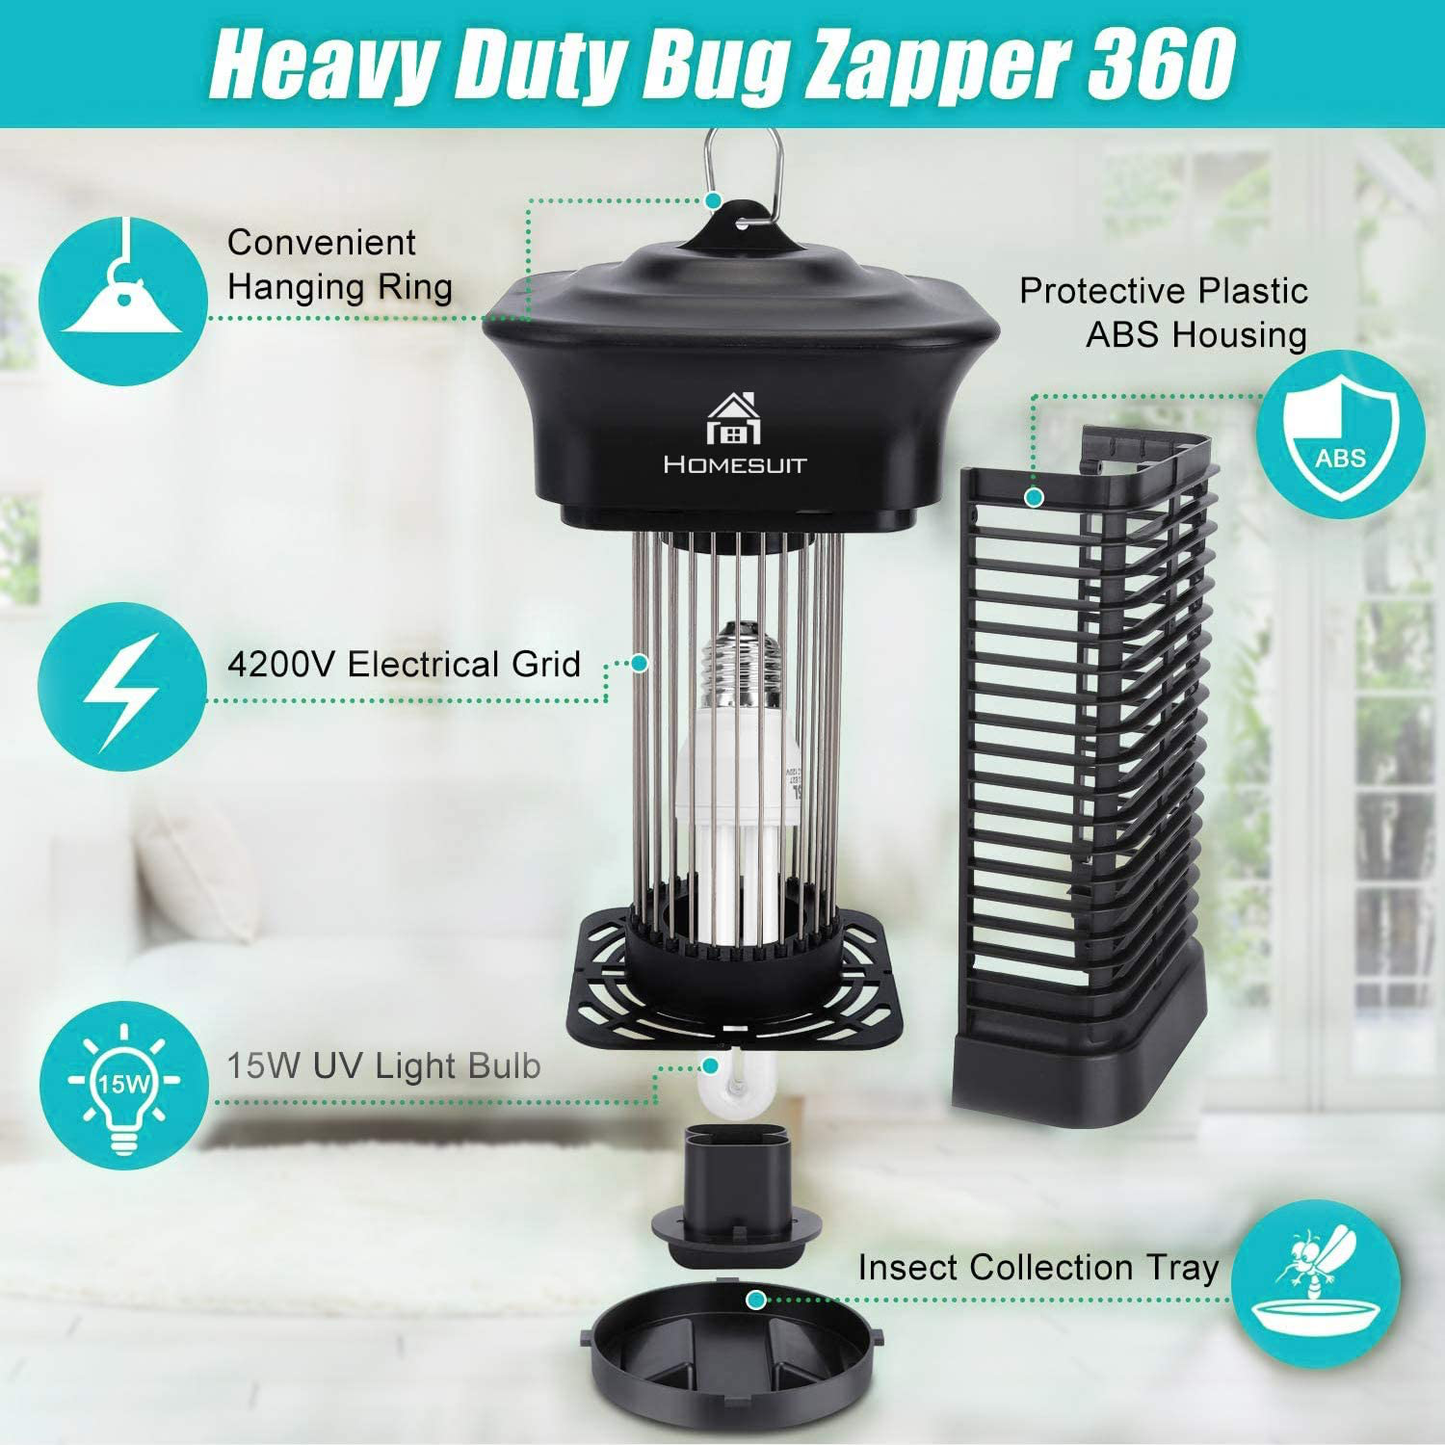 Homesuit Bug Zapper 15W for Outdoor and Indoor ,High Powered 4000V Electric Mosquito Zappers Killer , Waterproof Insect Fly Trap Outdoor ,Electronic Light Bulb Lamp for Home Backyard Patio